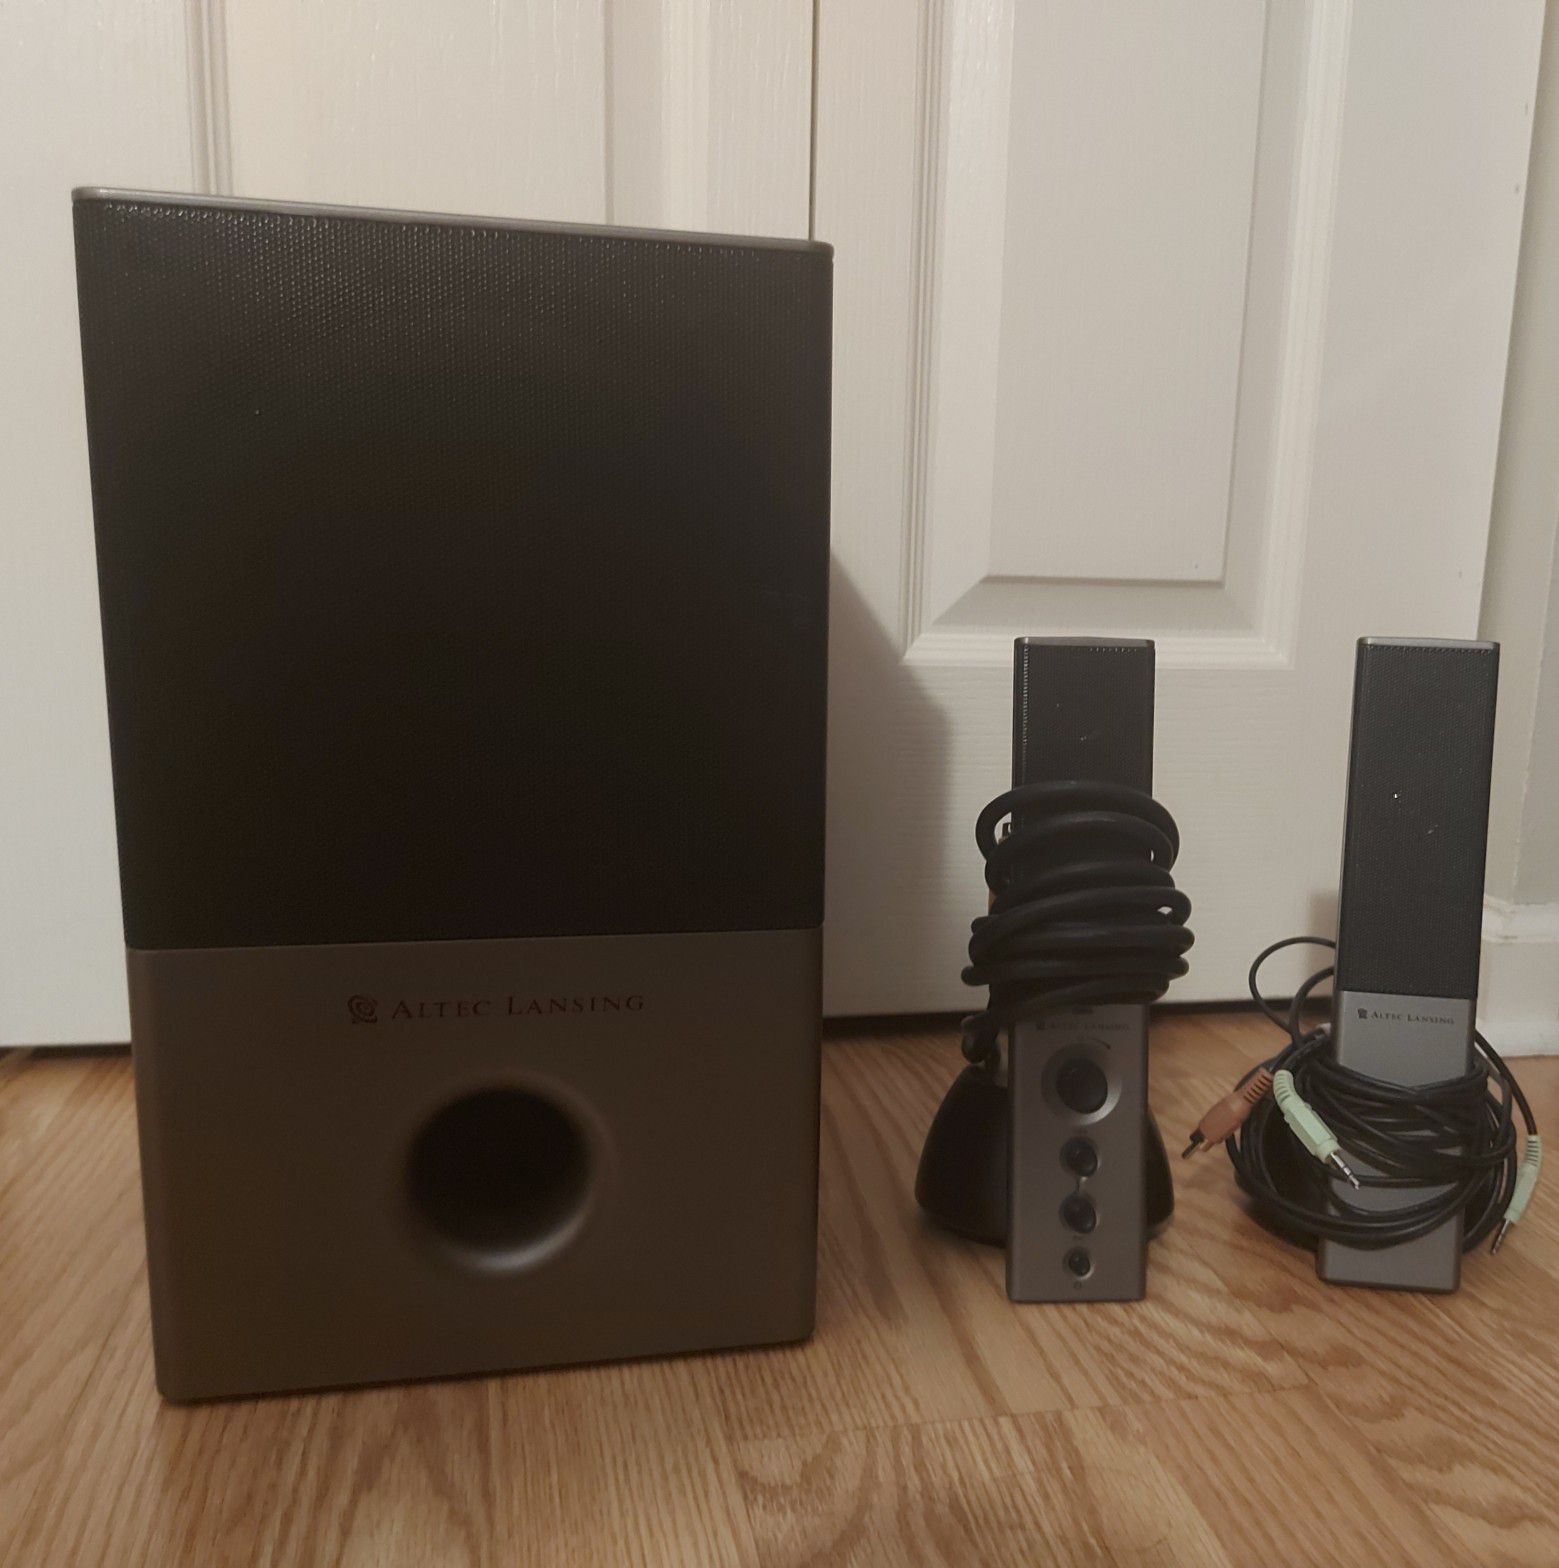 Altec Lansing VS4121 Computer Speakers With Subwoofer